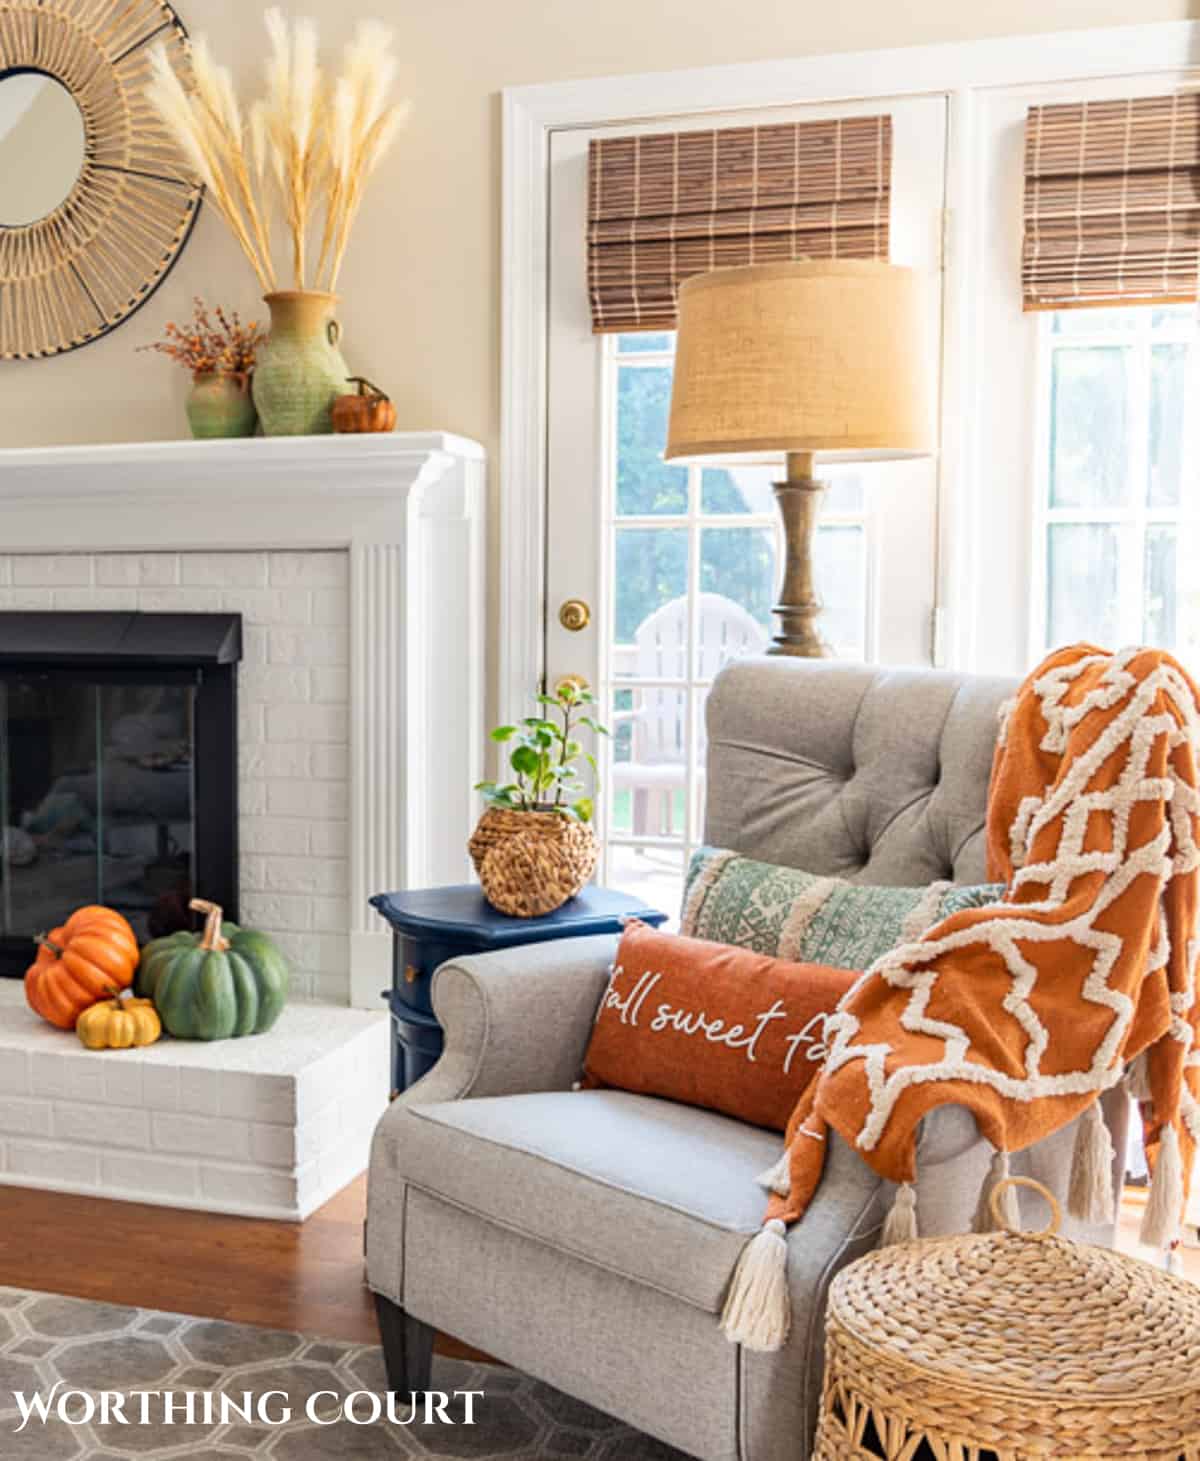 plush fall throw blanket over a gray arm chair in front of a fireplace with fall decor to demonstrate a fall aesthetic